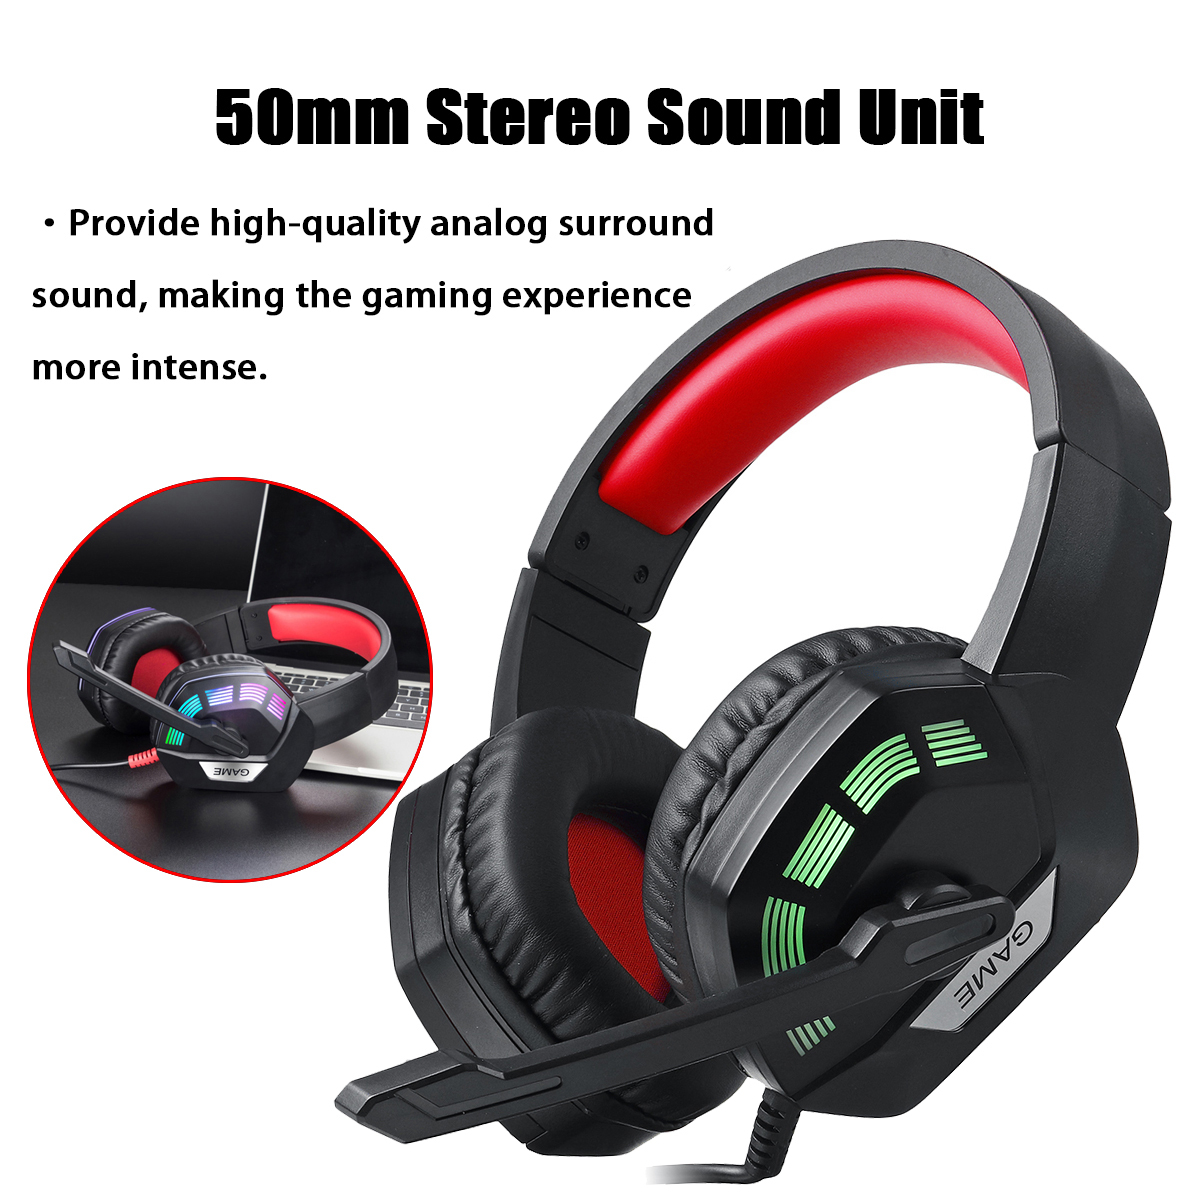 M1-Gaming-Headset-Surround-Sound-Music-Earphones-USB-71--35mm-Wired-RGB-Backlight-Game-Headphones-wi-1827492-12